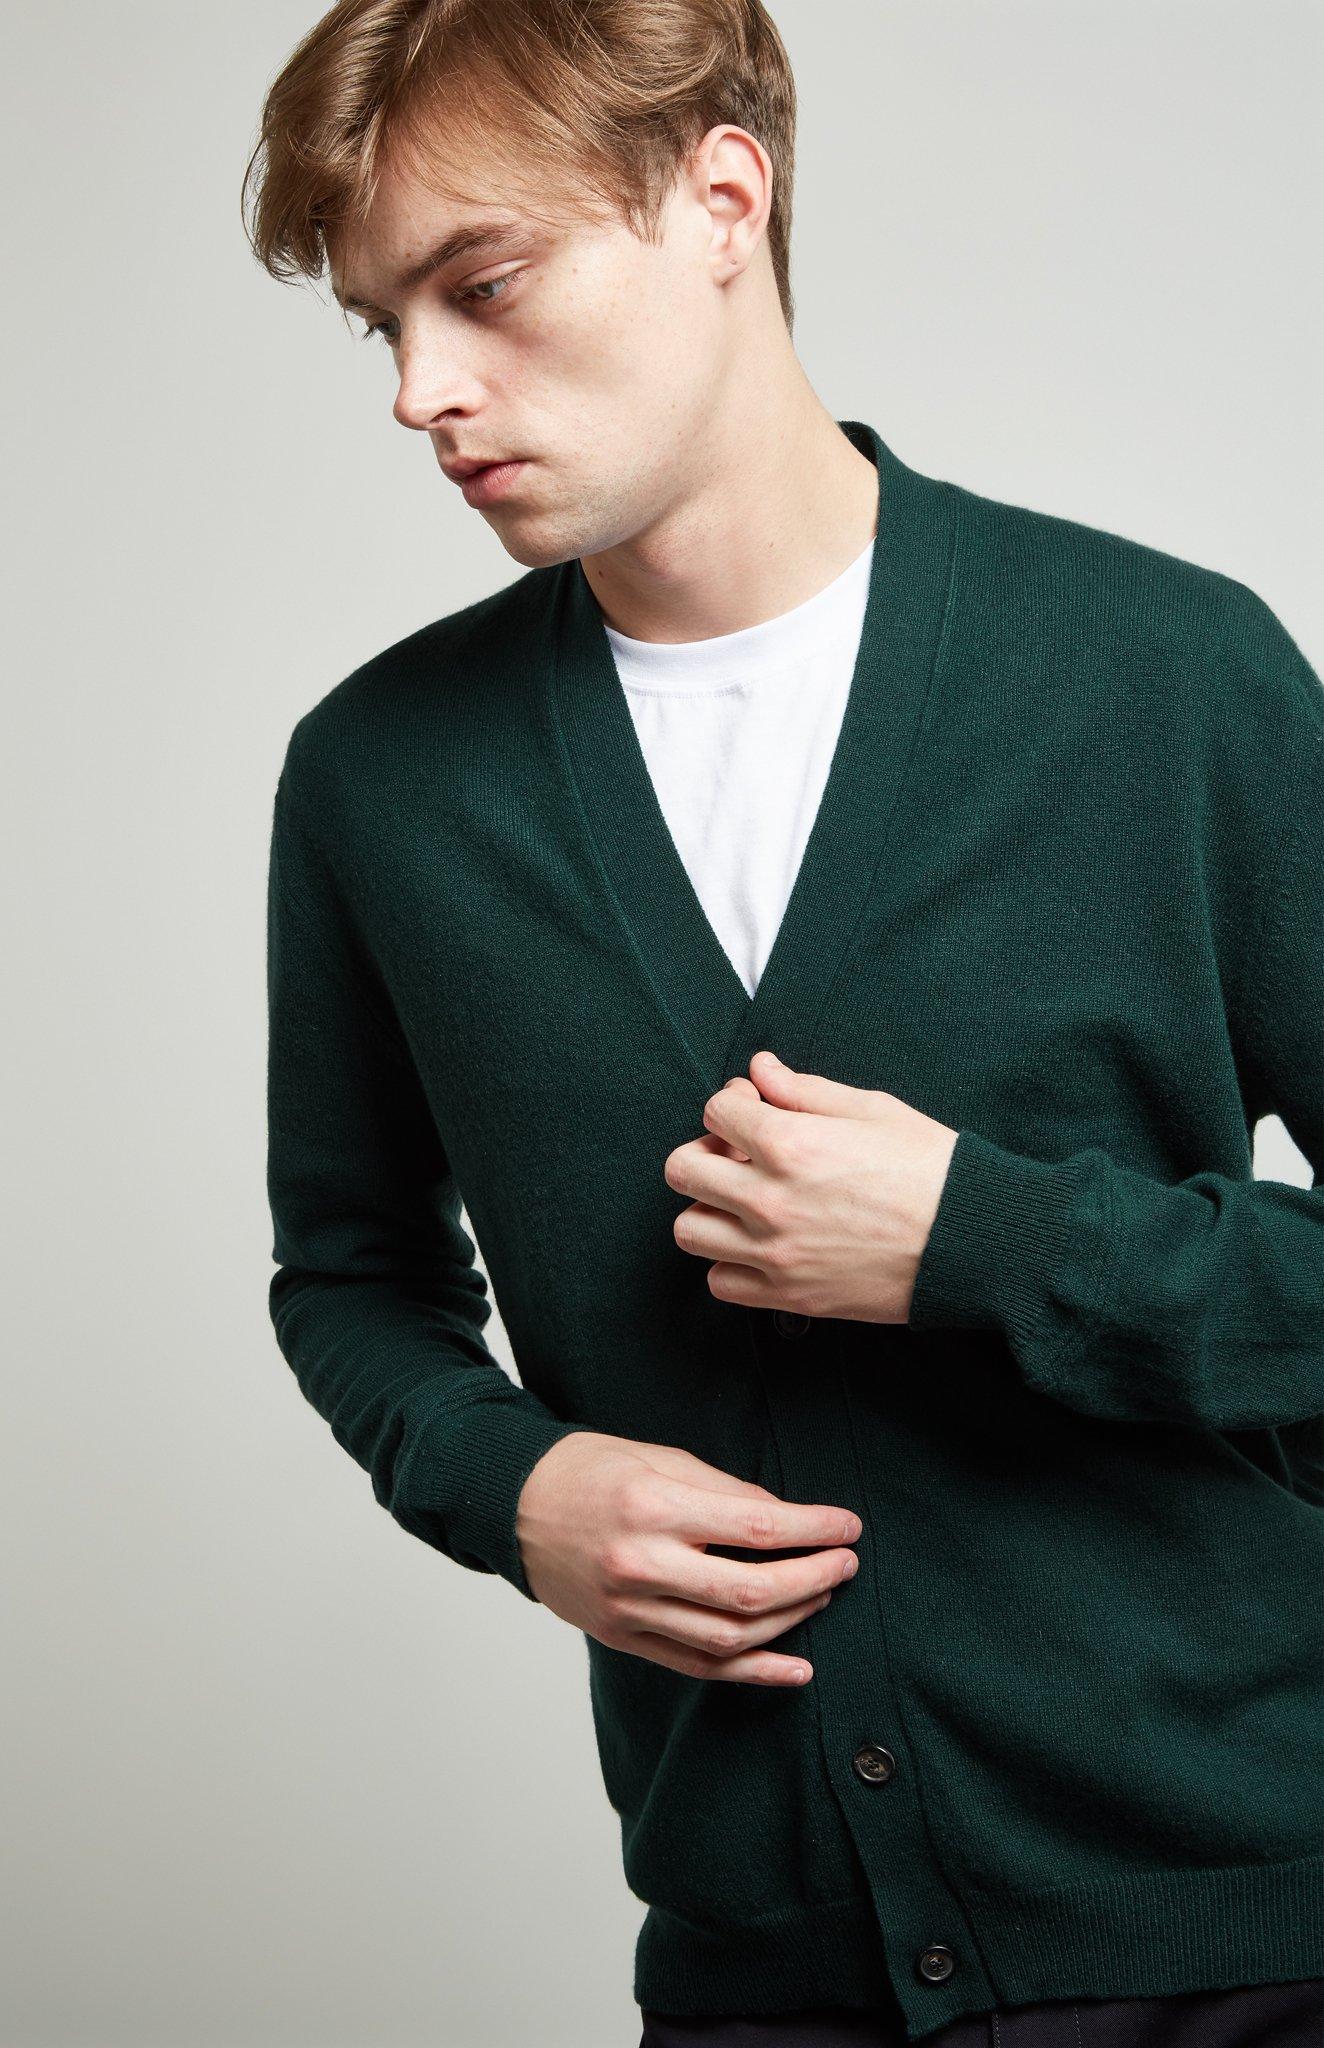 Pringle of Scotland Classic Cashmere Cardigan in Green for Men - Lyst